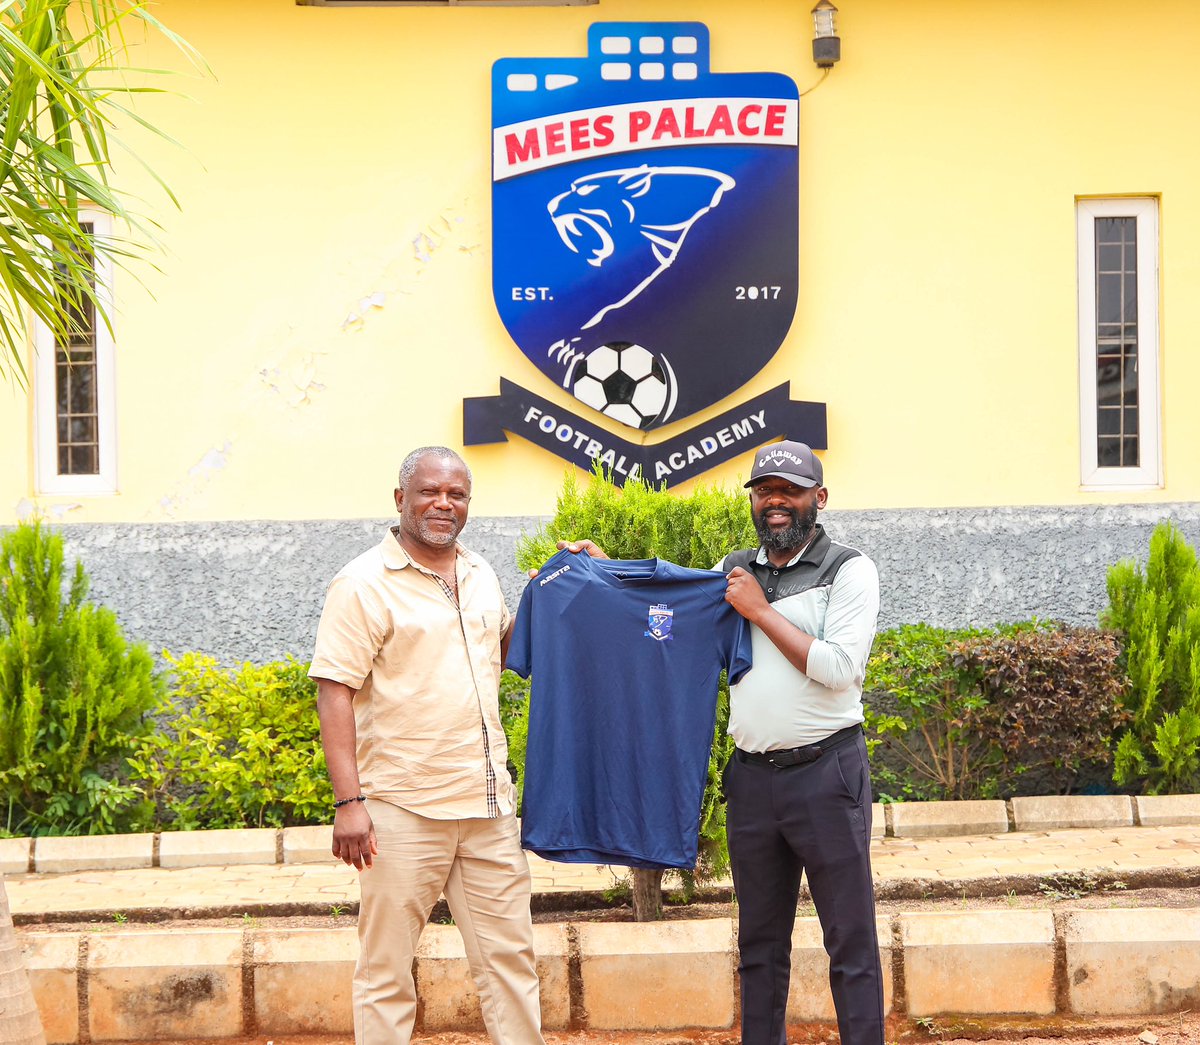 We were delighted to welcome Christopher Danjuma, the Women's National U20 Coach, for a special visit. Our coaches benefited significantly from his extensive knowledge and experience, making it a truly memorable day.